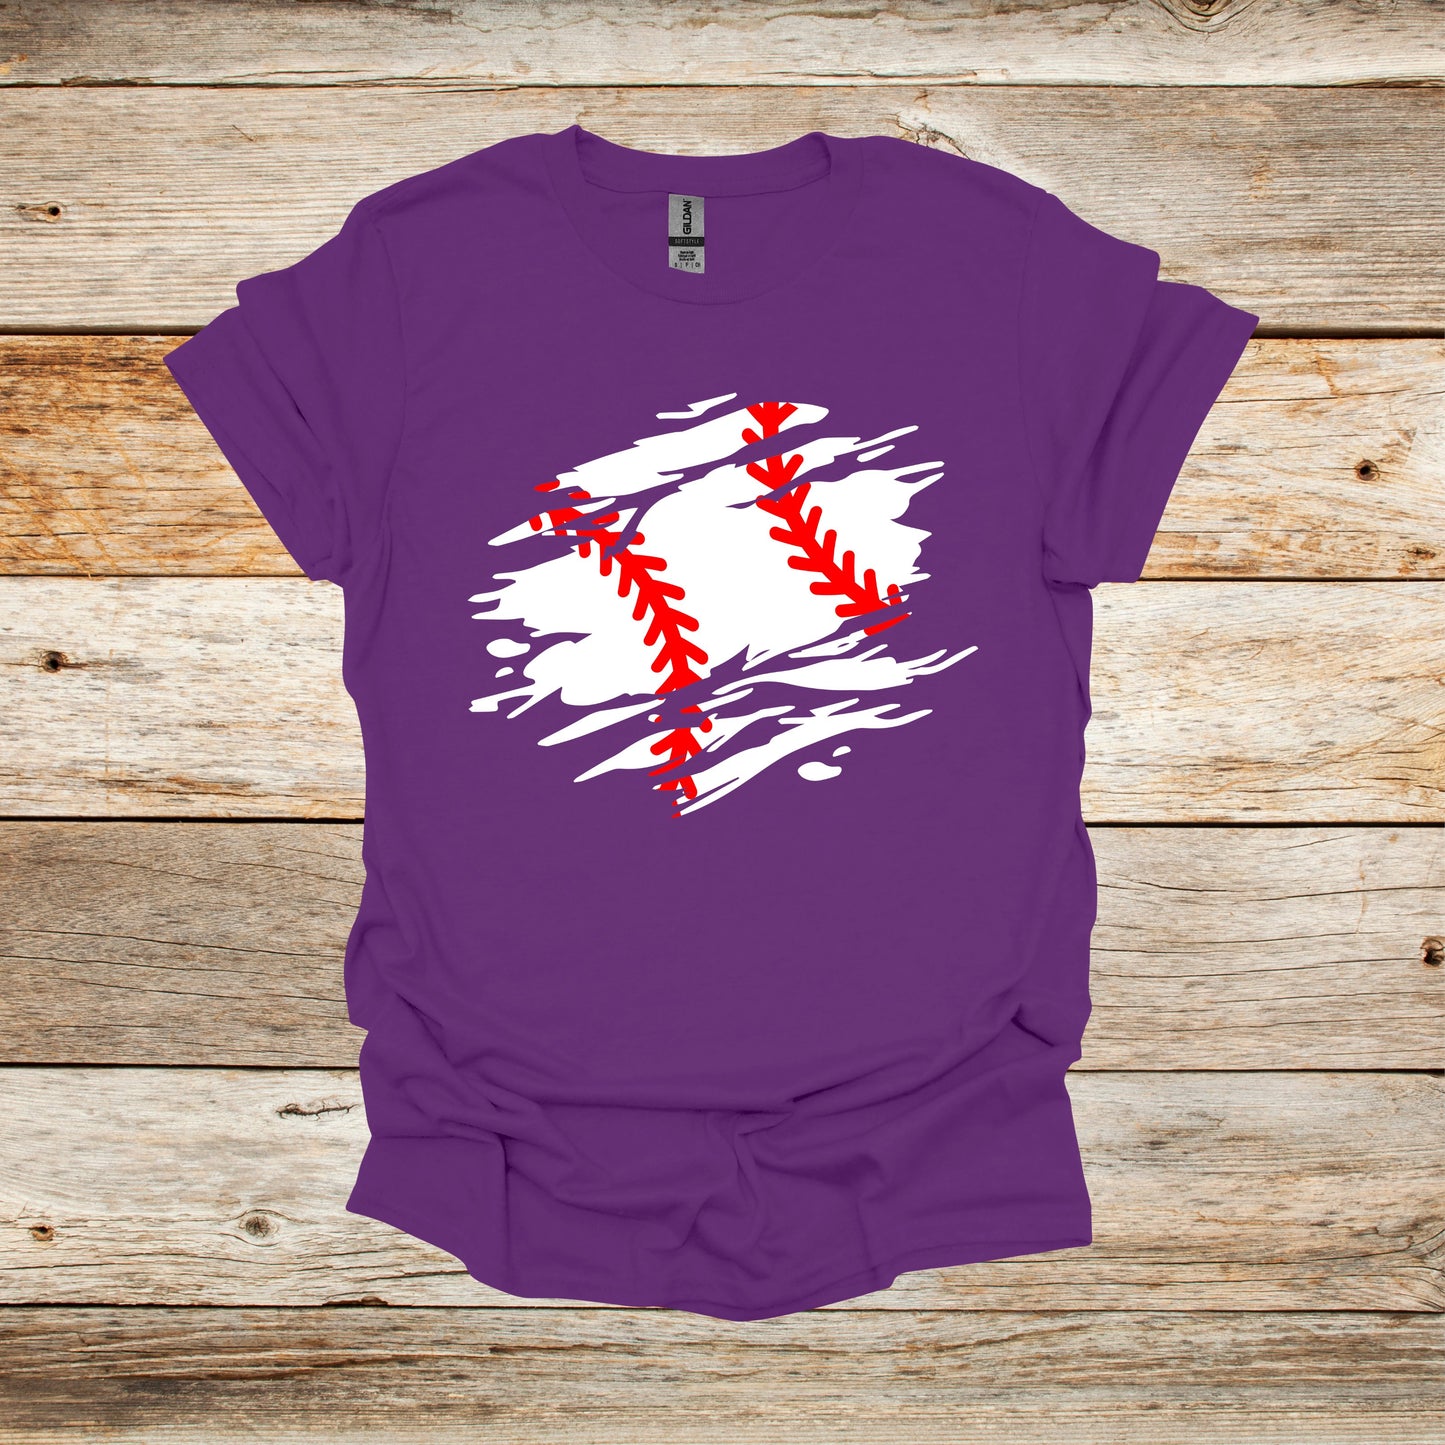 Baseball T-Shirt - Adult and Children's Tee Shirts - Sports T-Shirts Graphic Avenue Purple Adult Small 